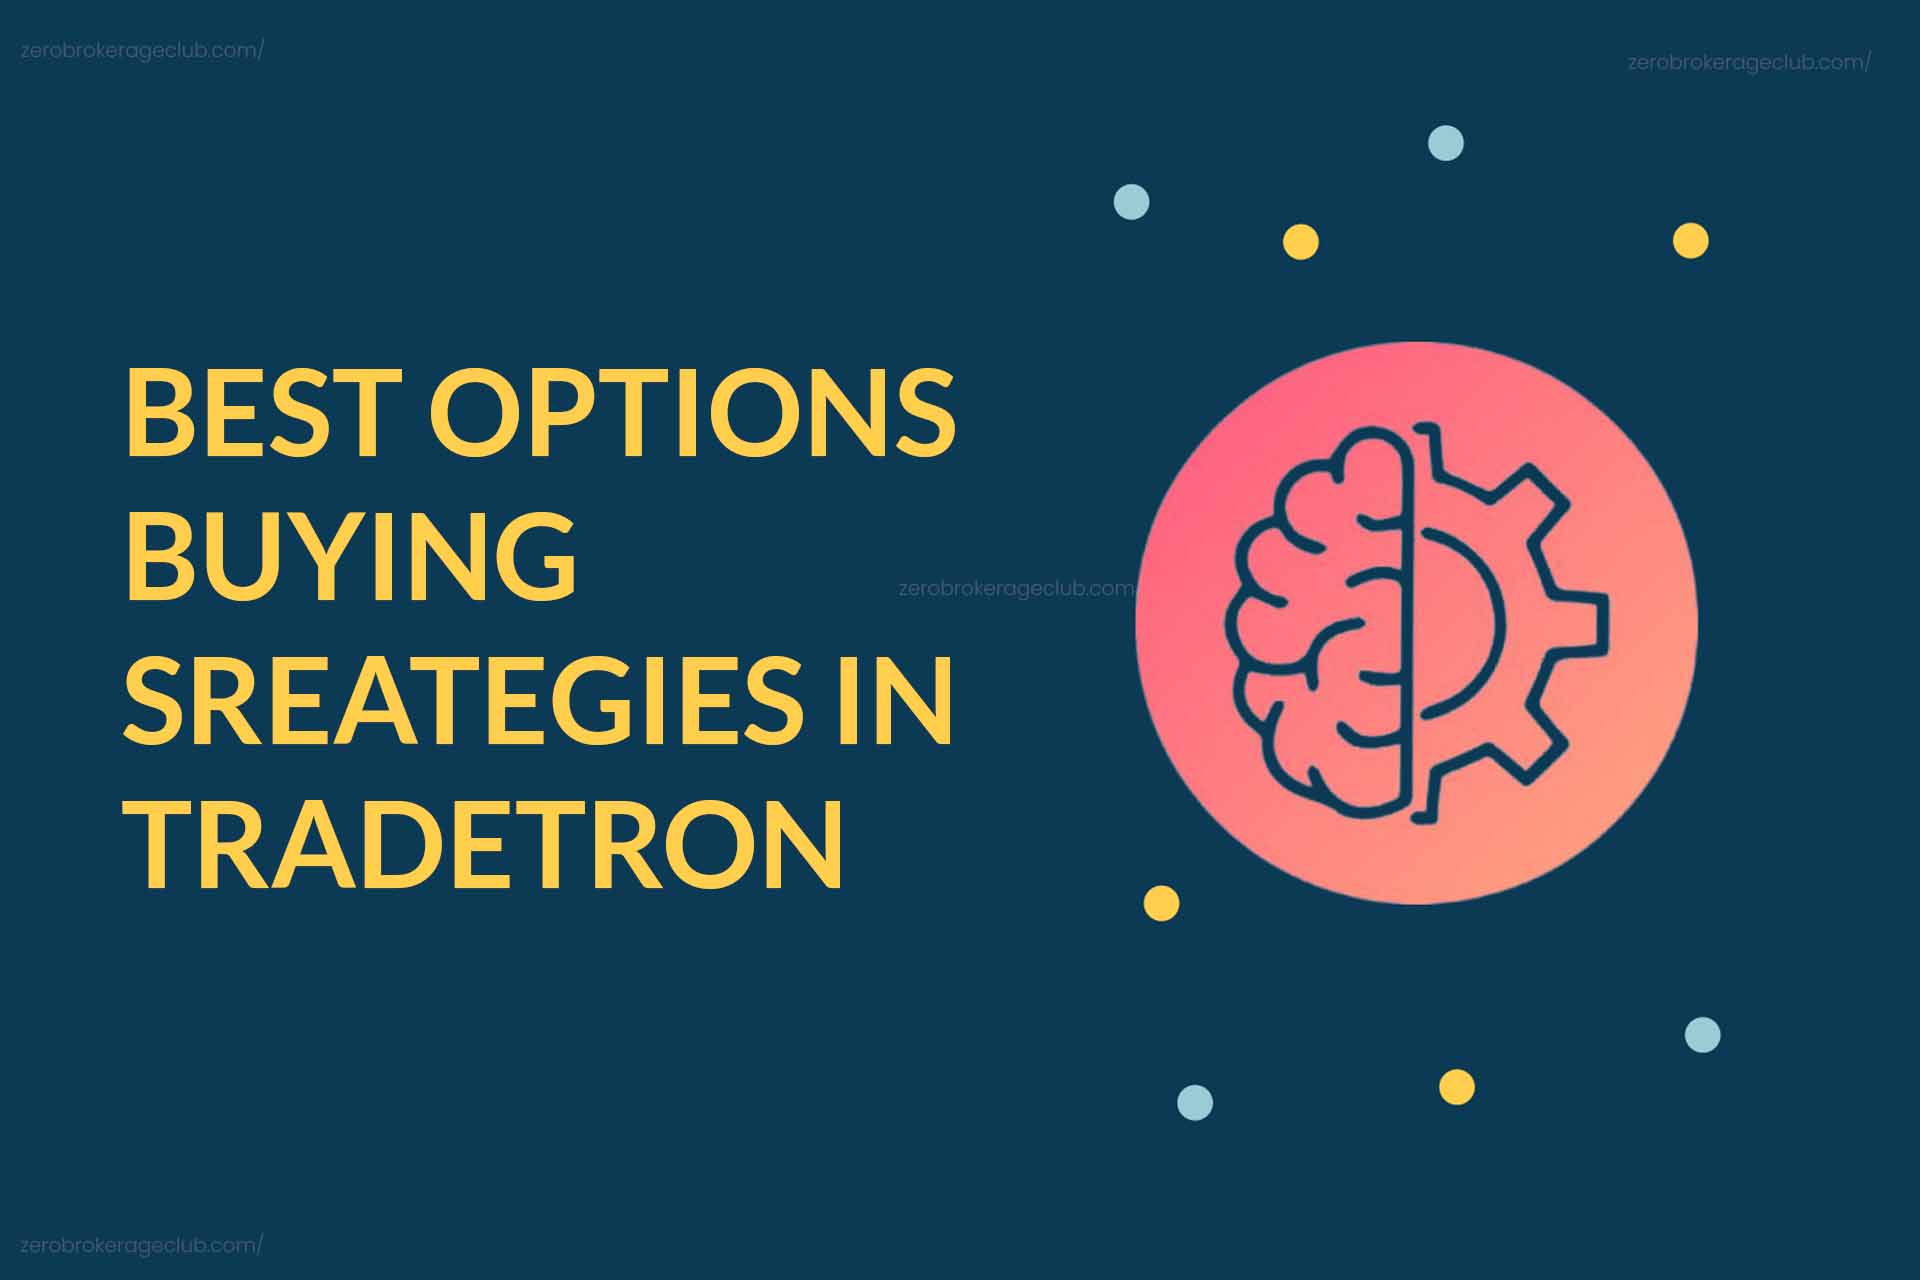 The Best Options Buying Strategies in Tradetron